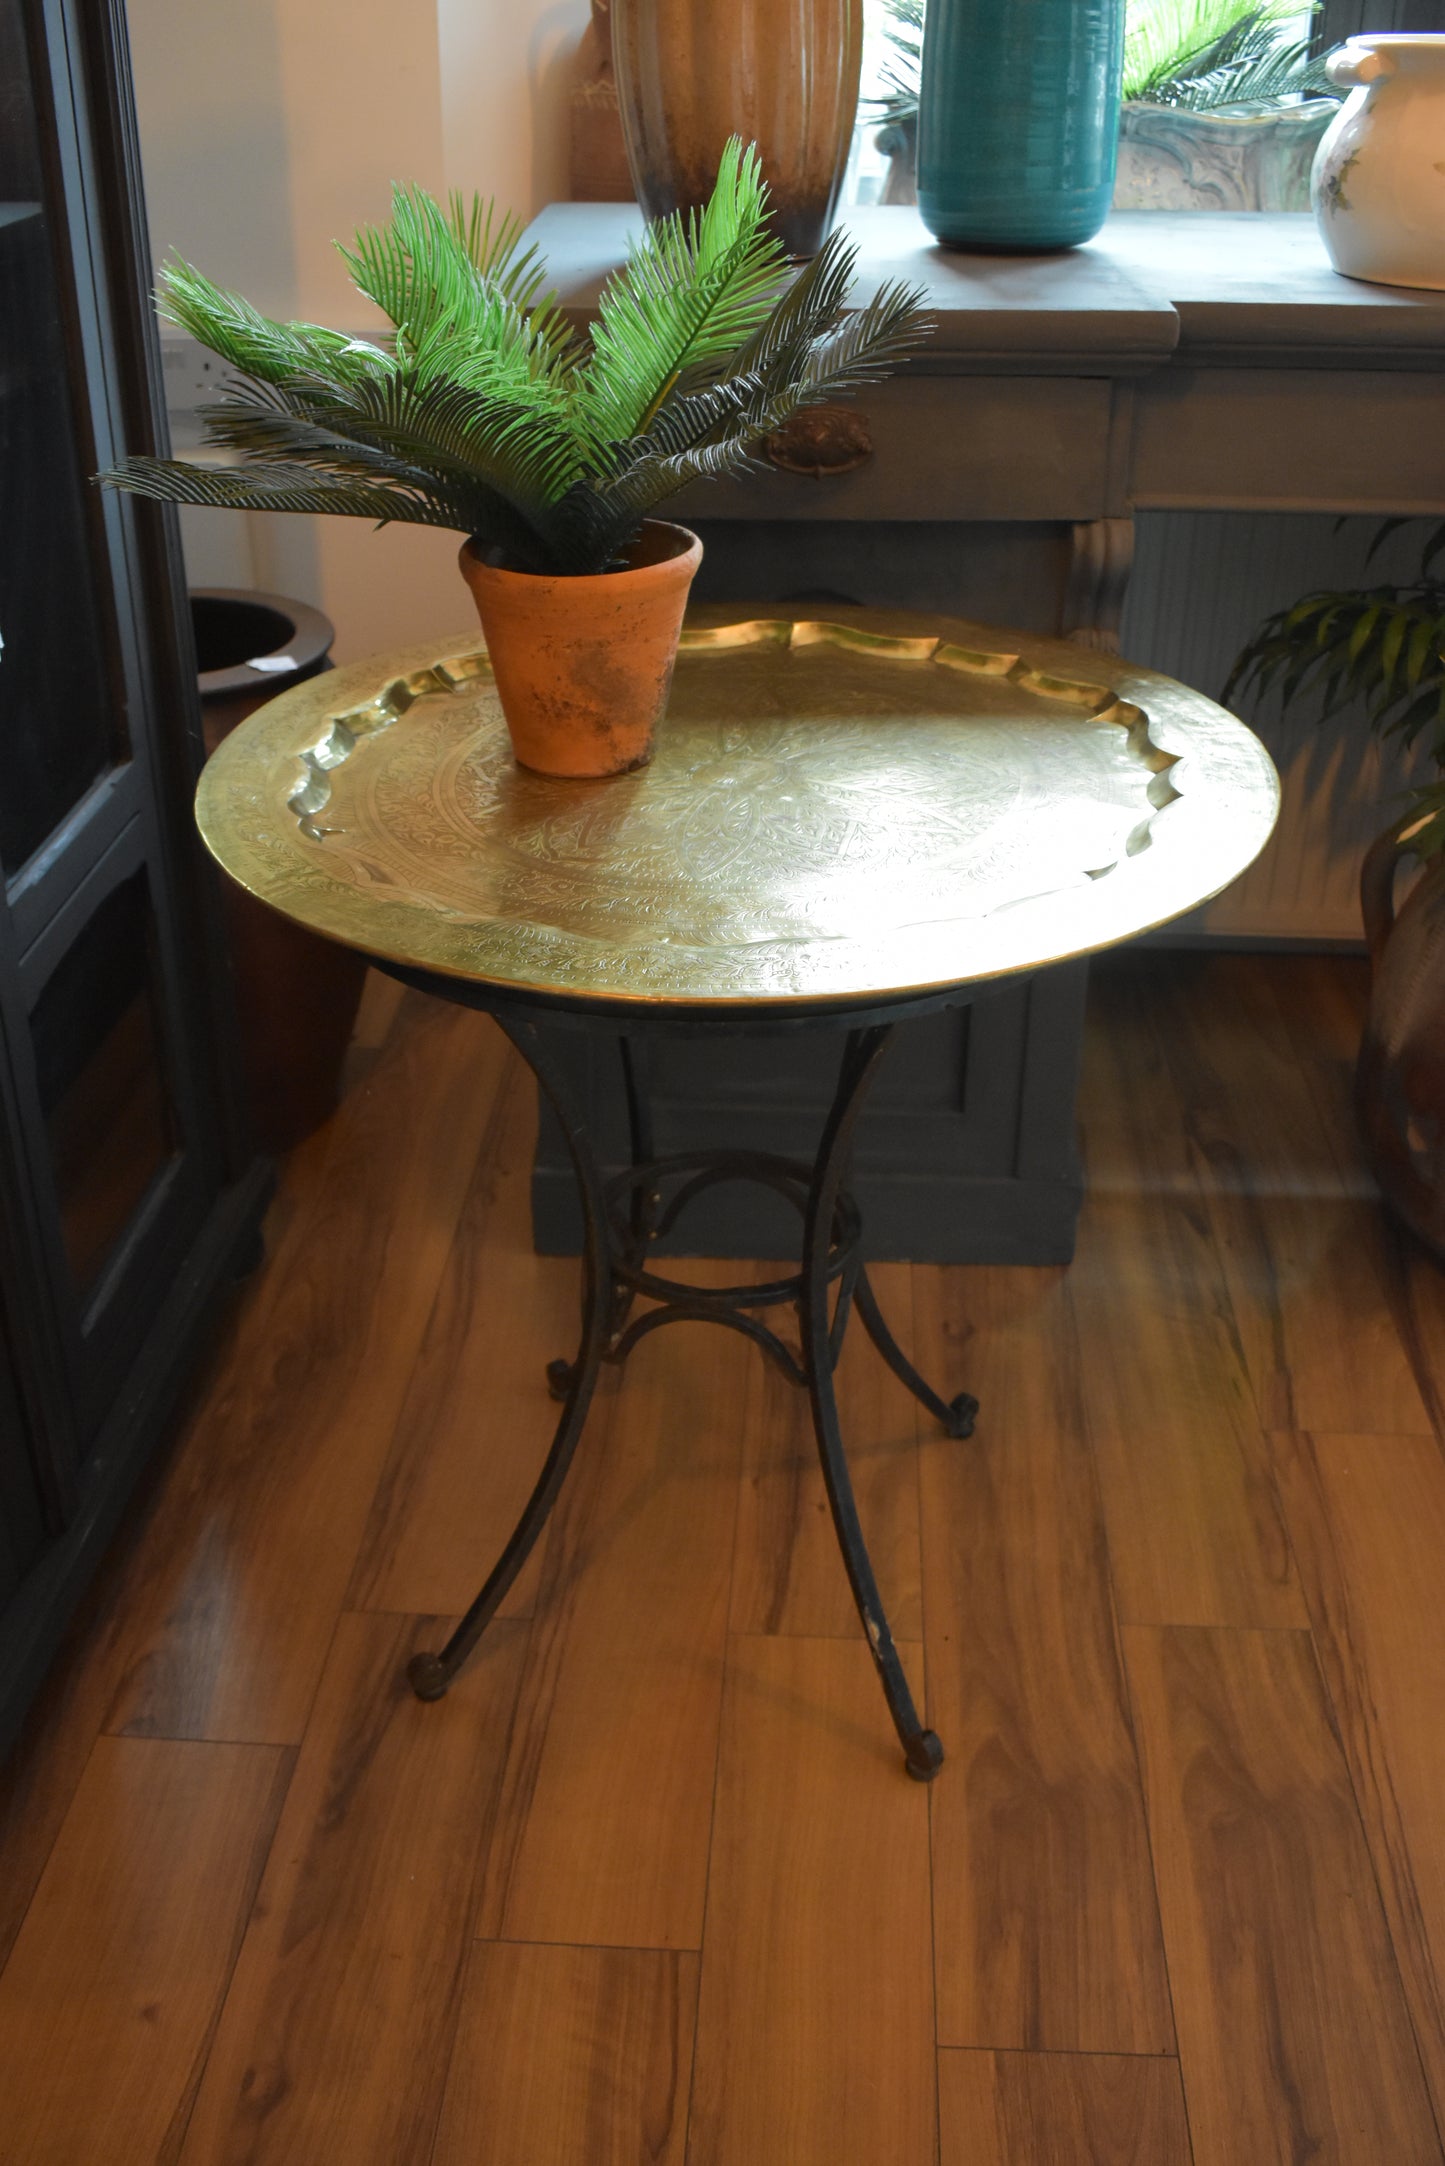 Cast Iron Brass Top French Table